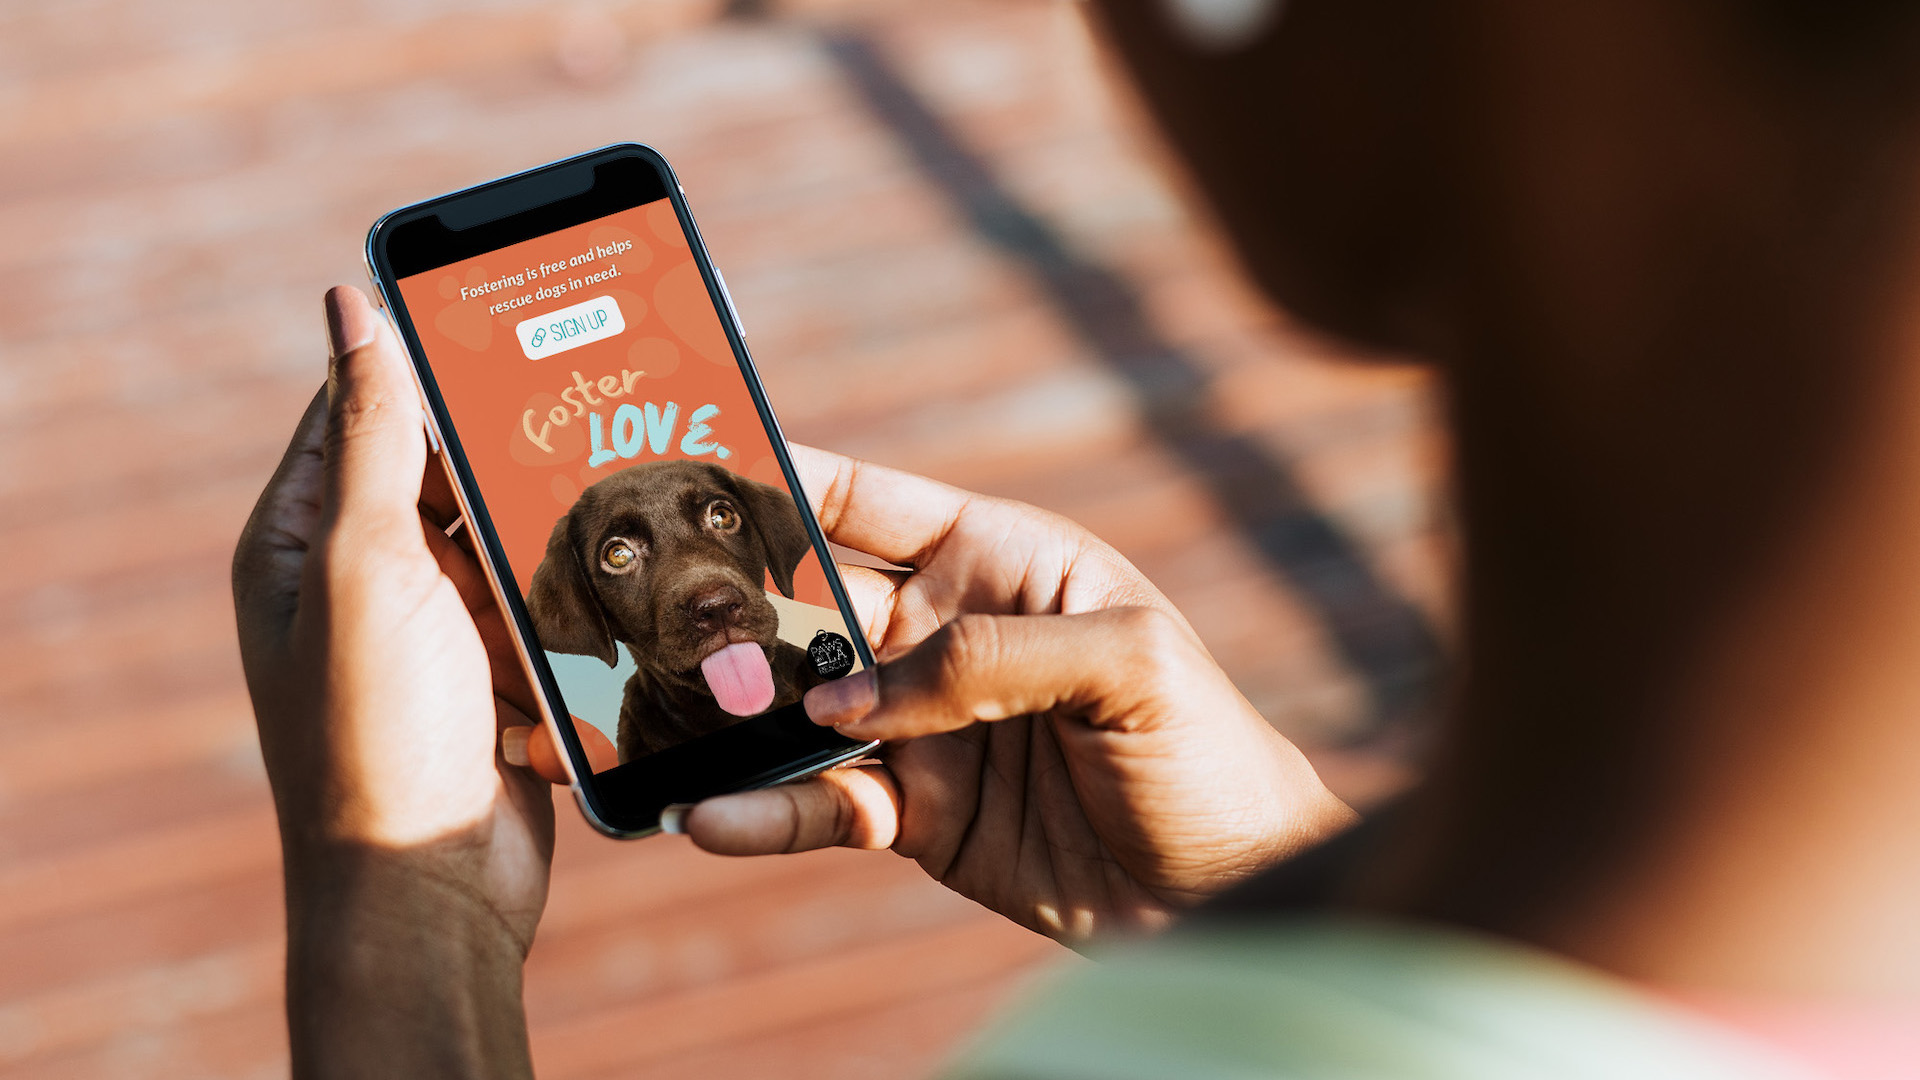 A mockup of a person looking at an Instagram post on their phone. The post reads 'Foster Love' on an orange background and features a chocolate lab with its tongue sticking out.